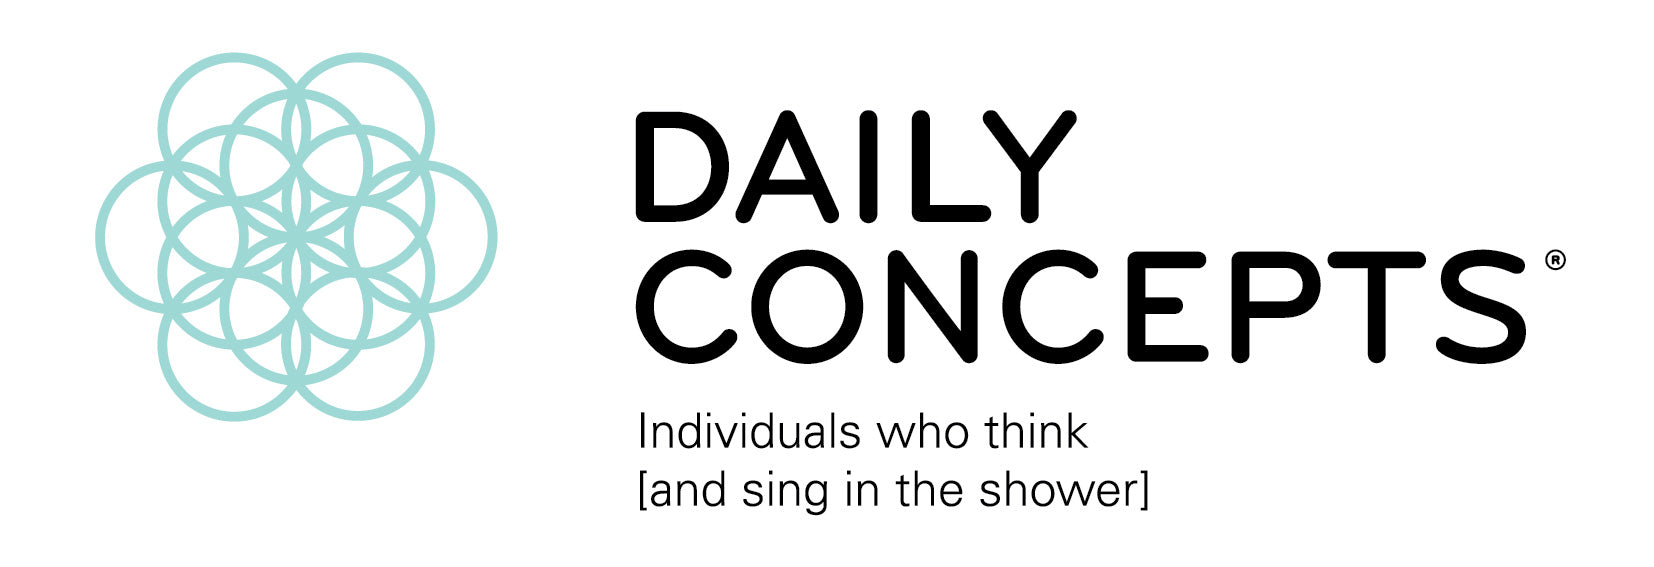 Daily Concepts, Individuals who think and sing in the Shower, cruelty free, vegan